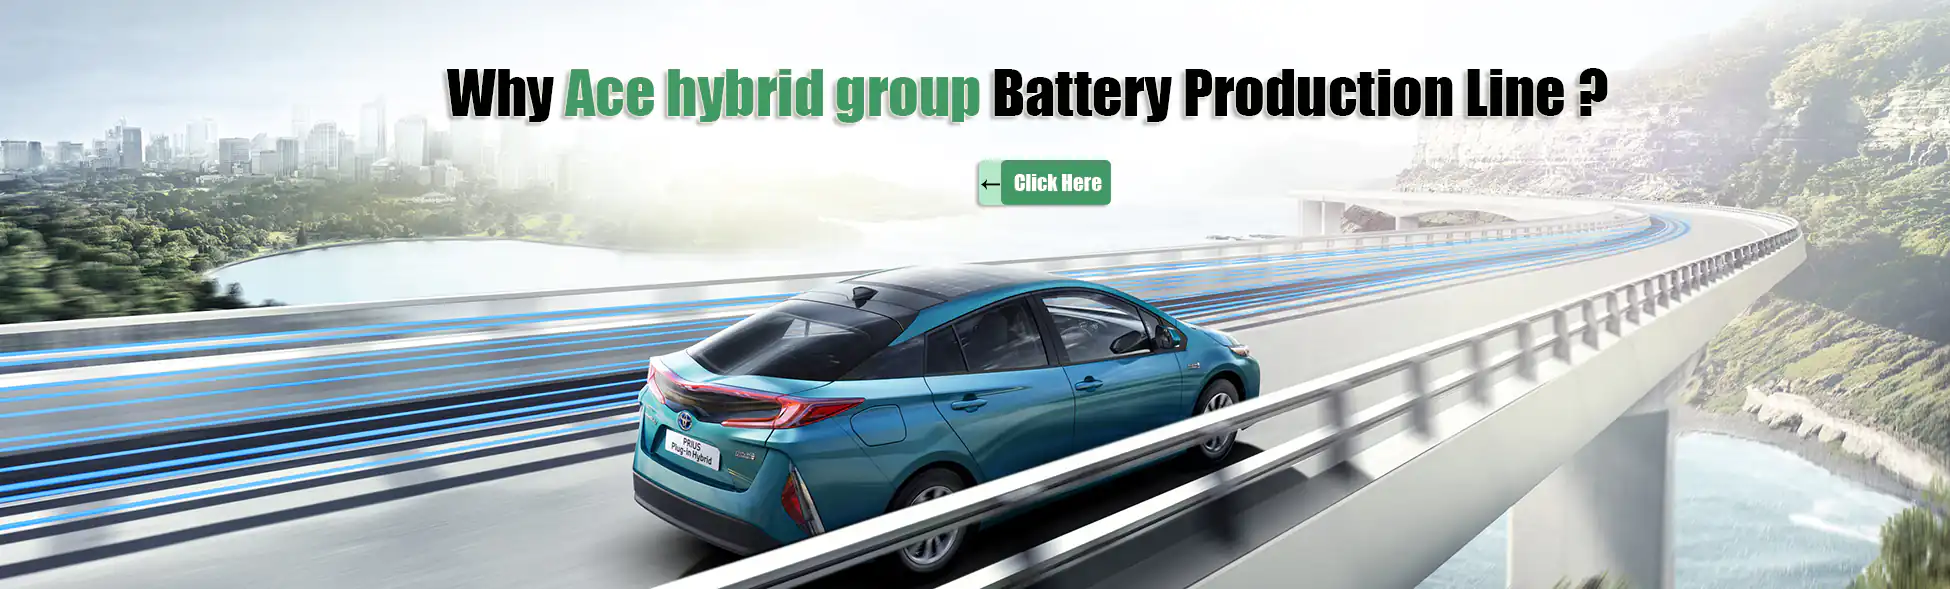 Why Ace hybrid group Battery Production Line